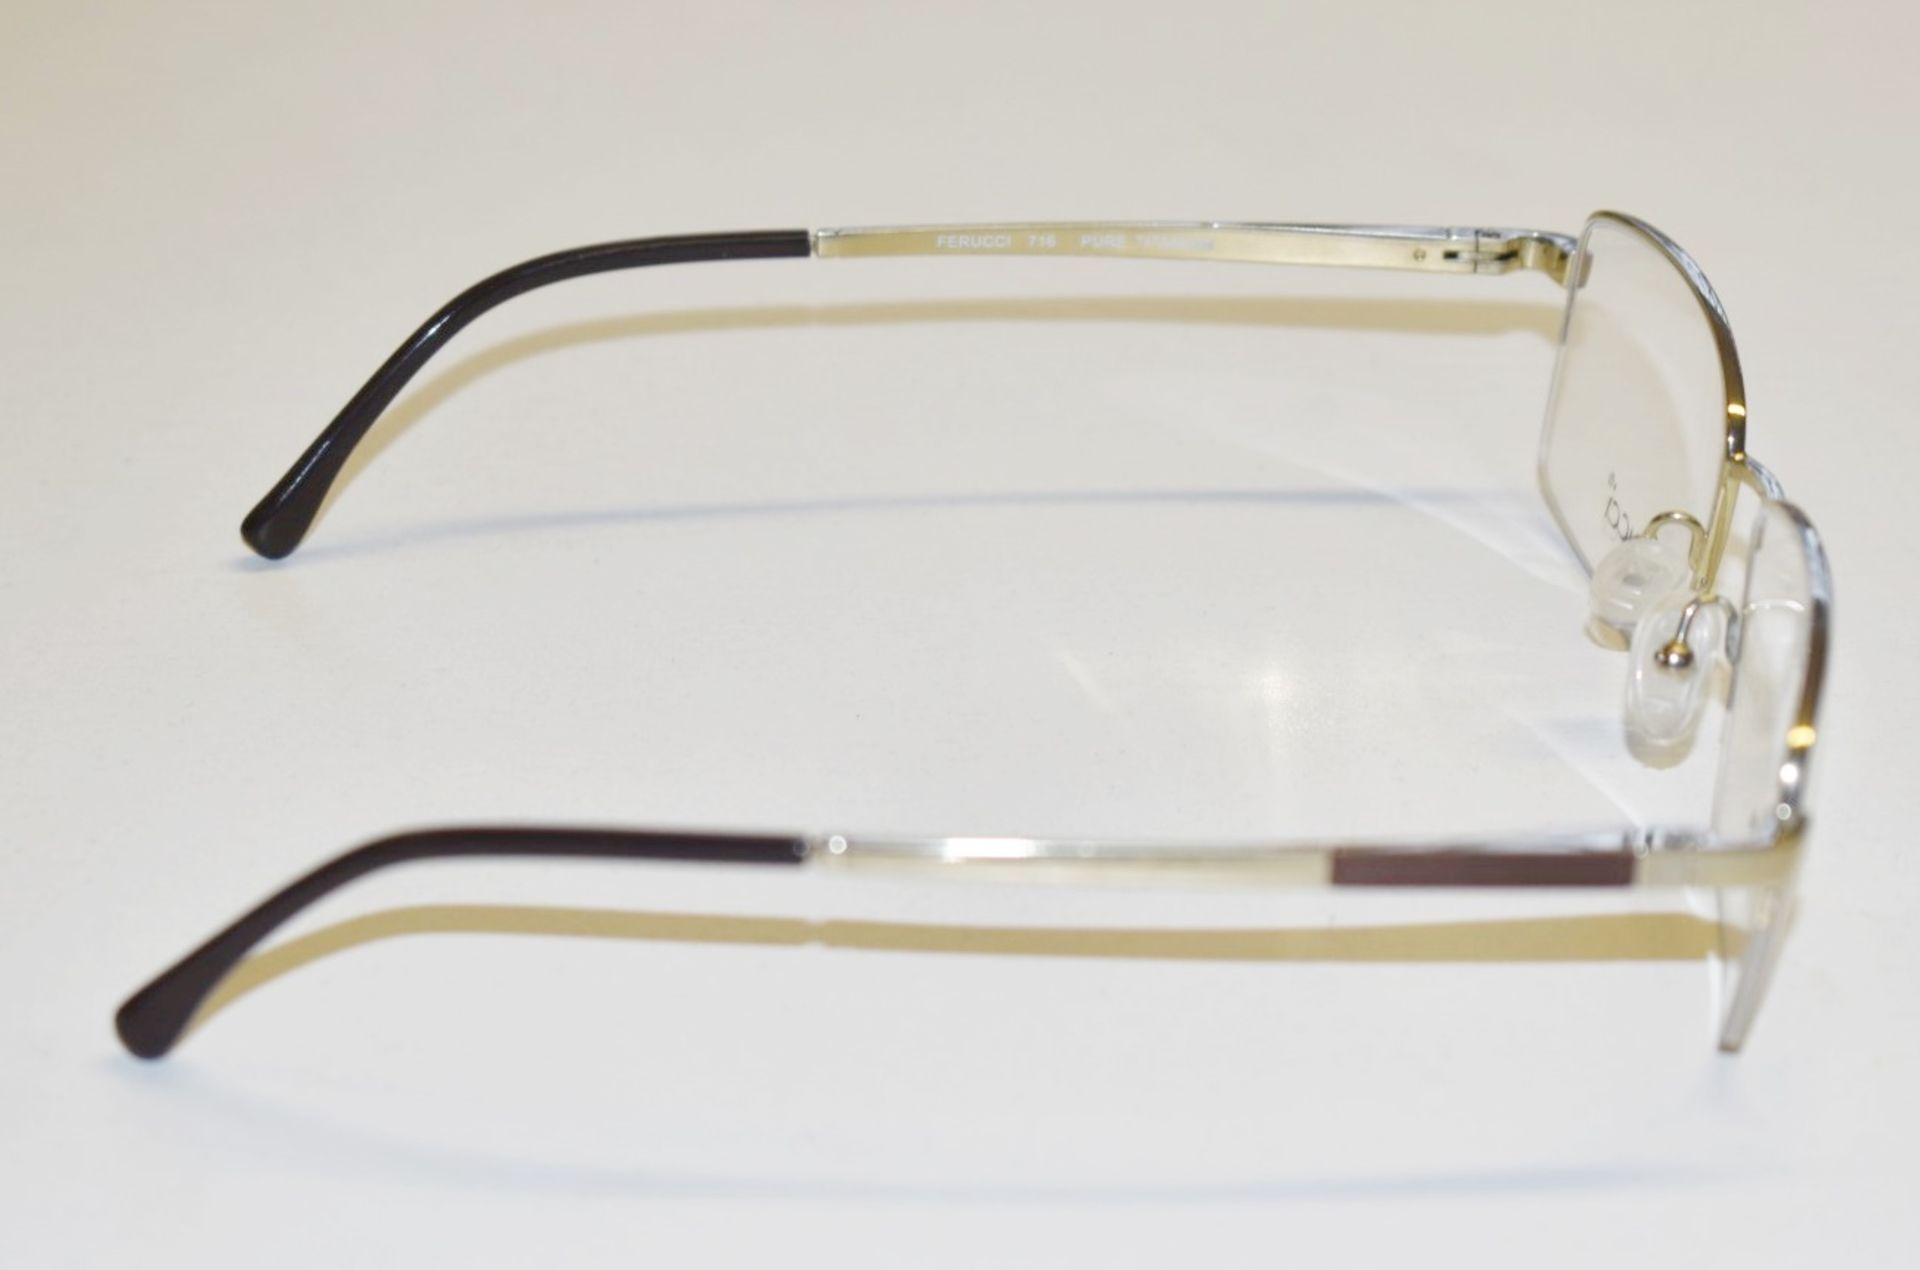 1 x Genuine FERUCCI Spectacle Eye Glasses Frame - Ex Display Stock  - Ref: GTI182 - CL645 - - Image 12 of 12